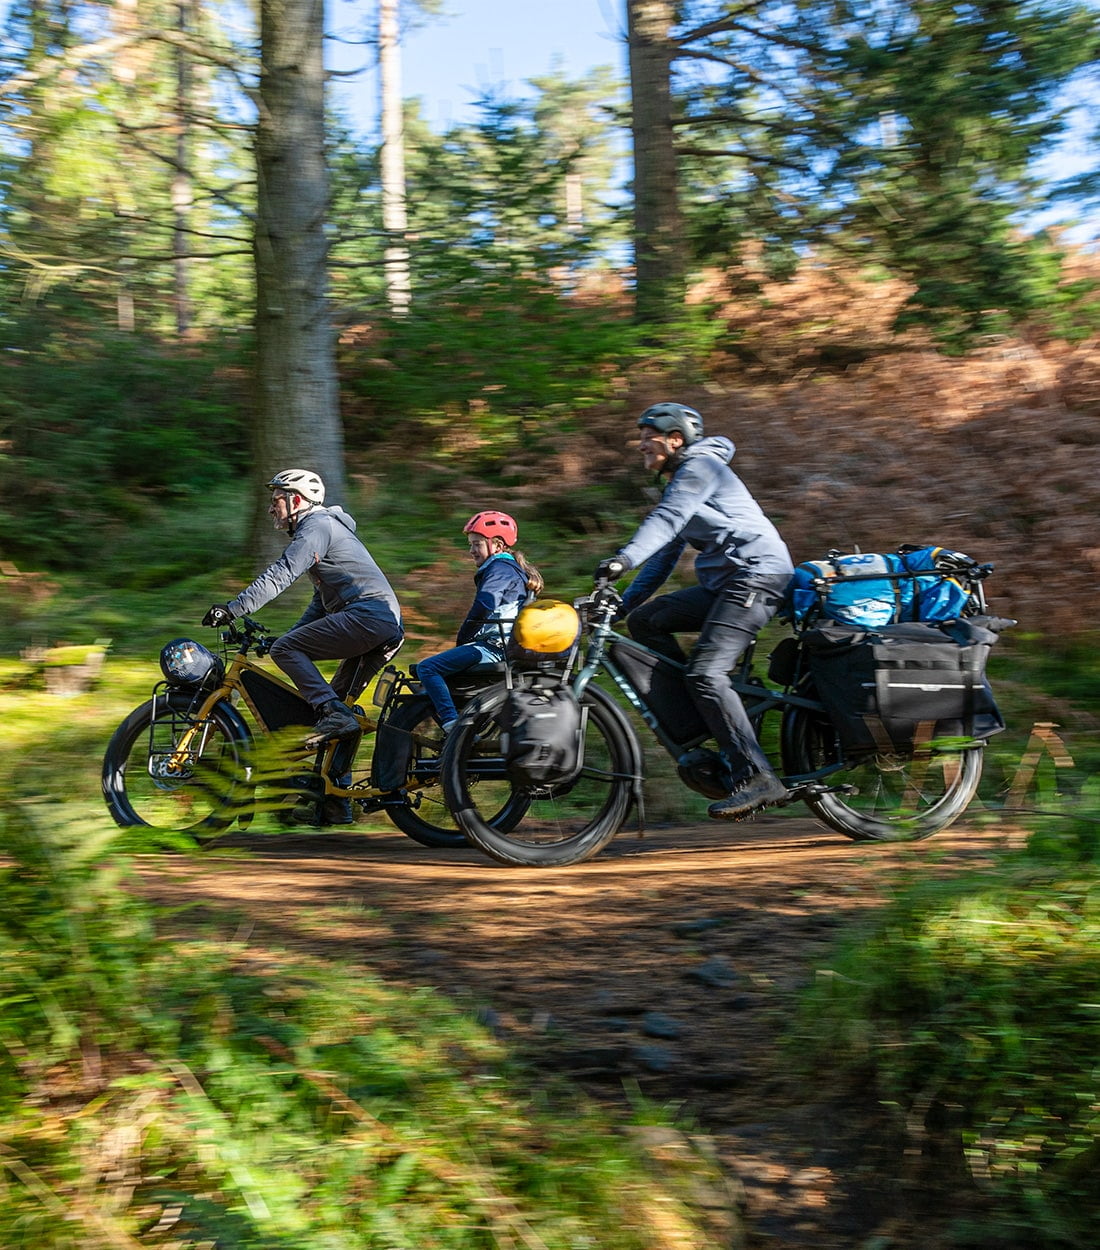 Tern Orox S12 Family riding into camp, on a trail